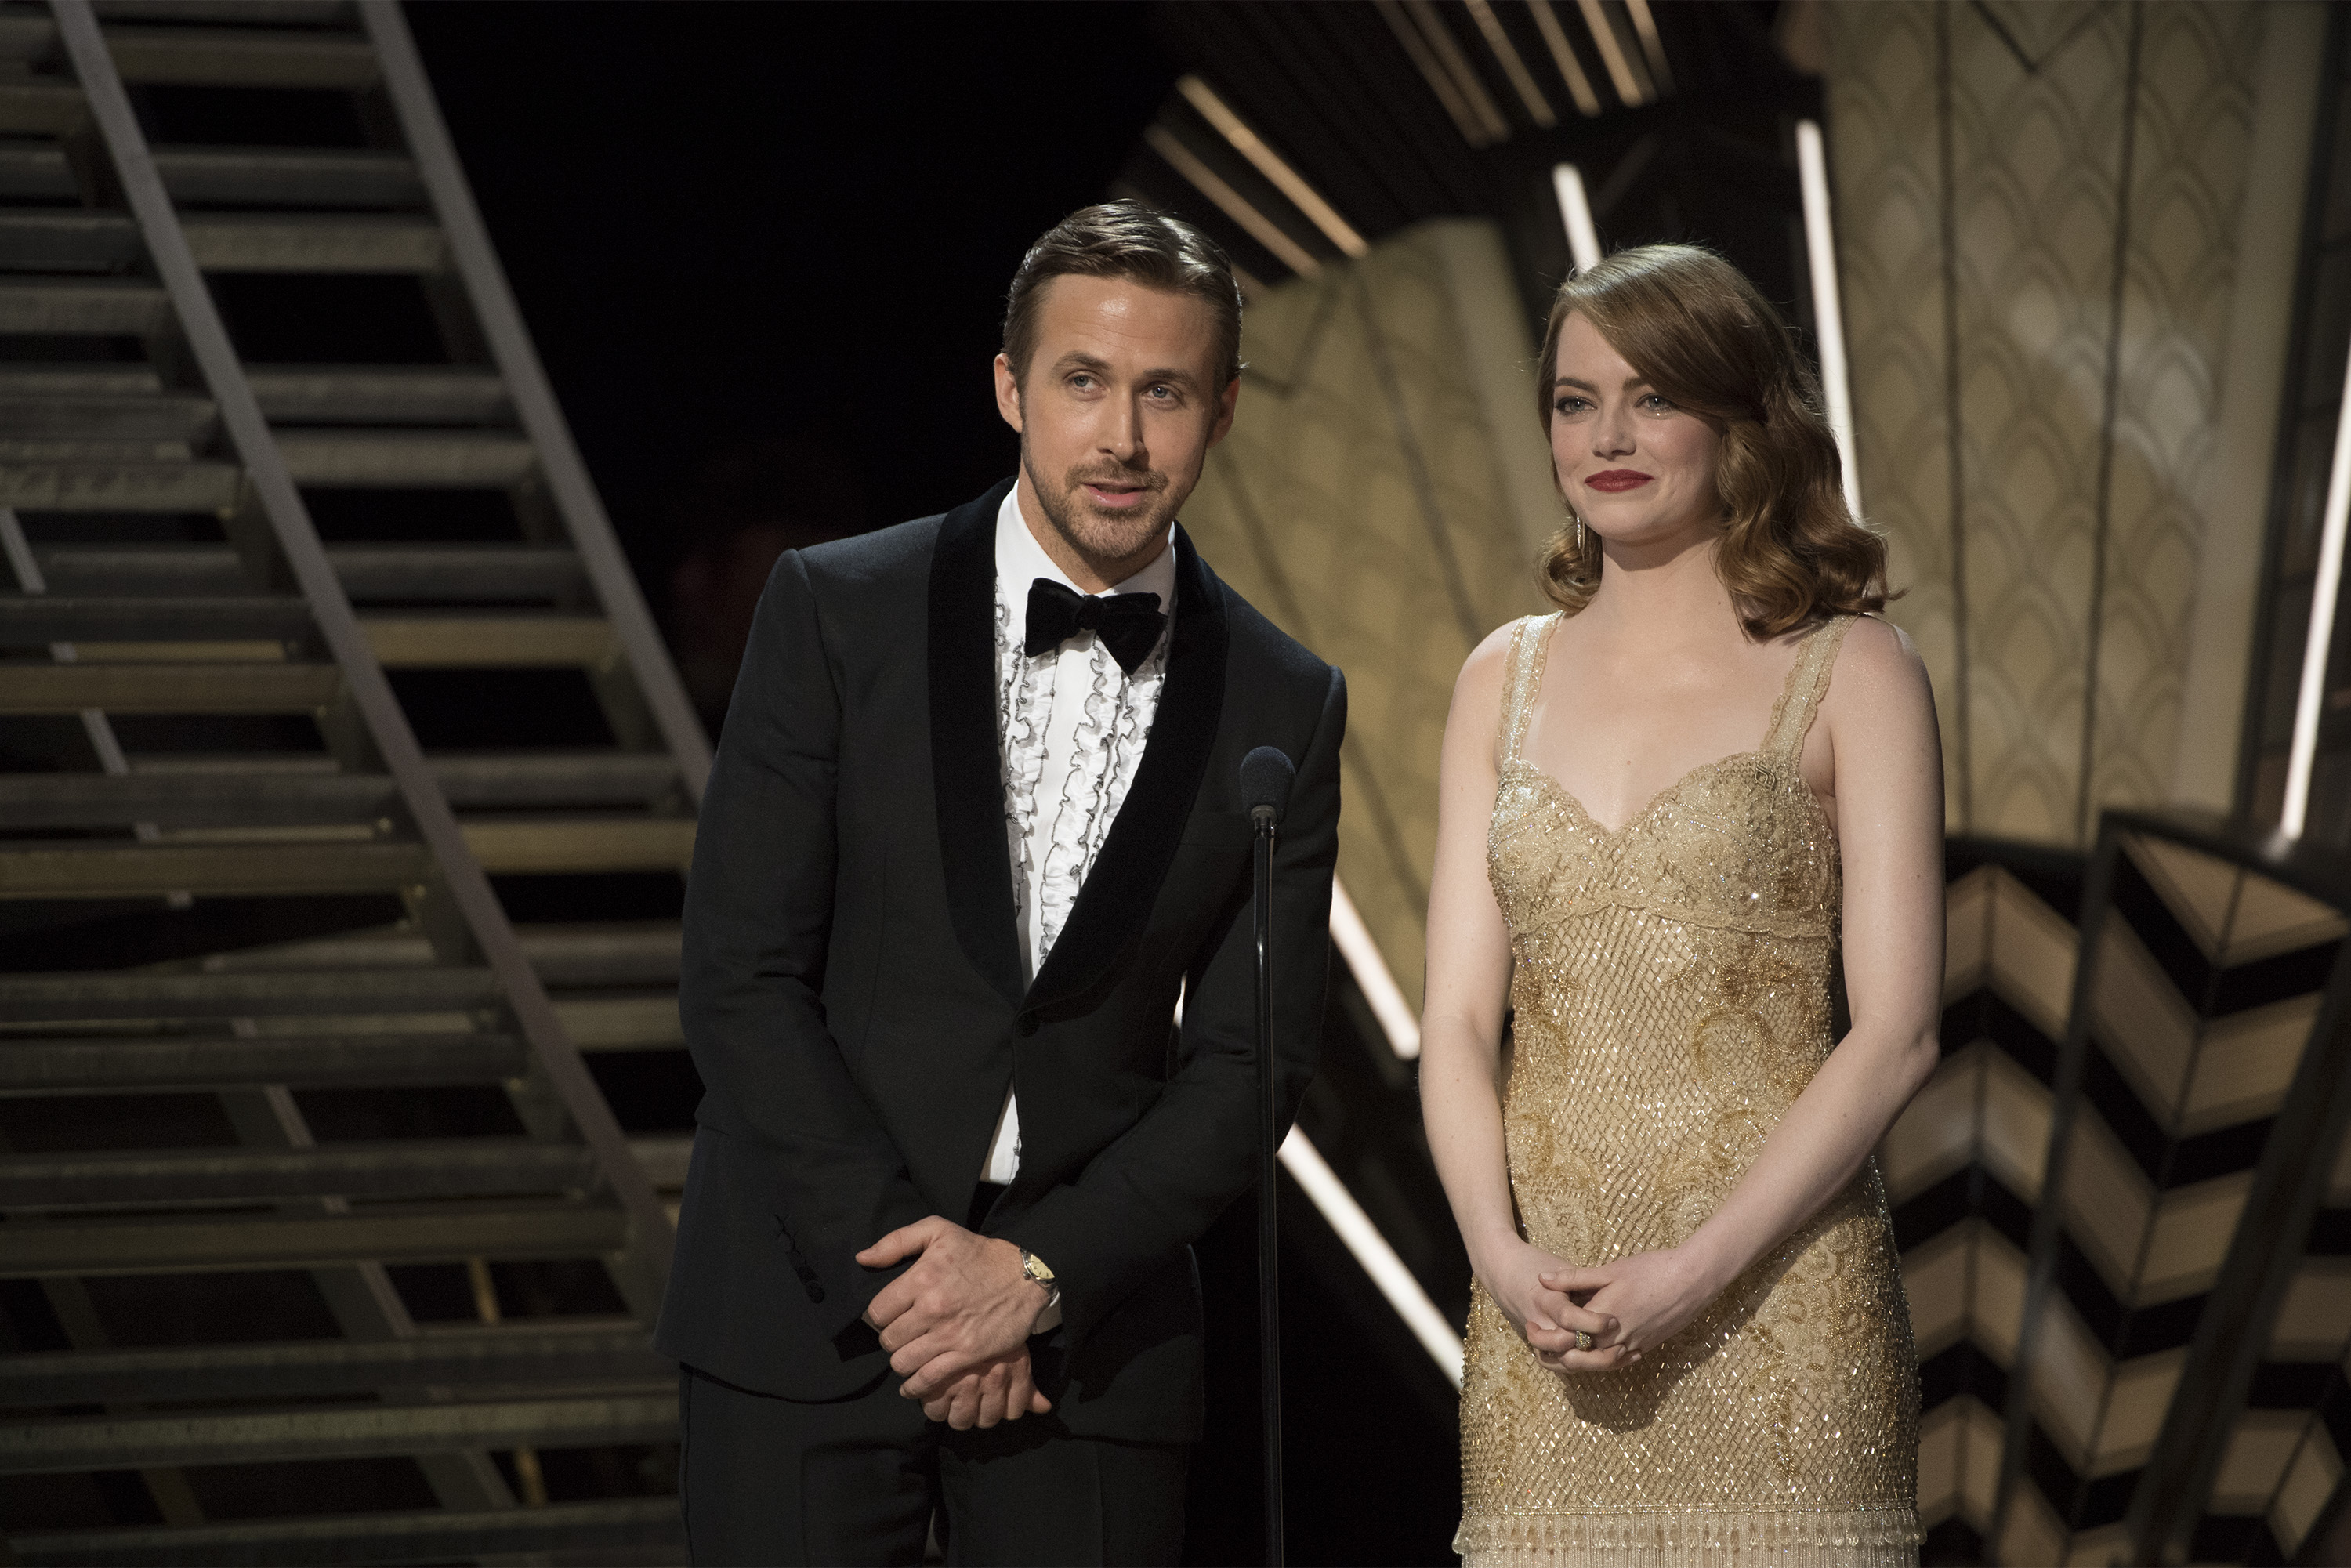 Ryan Gosling and Emma Stone present on stage at the 2017 Academy Awards